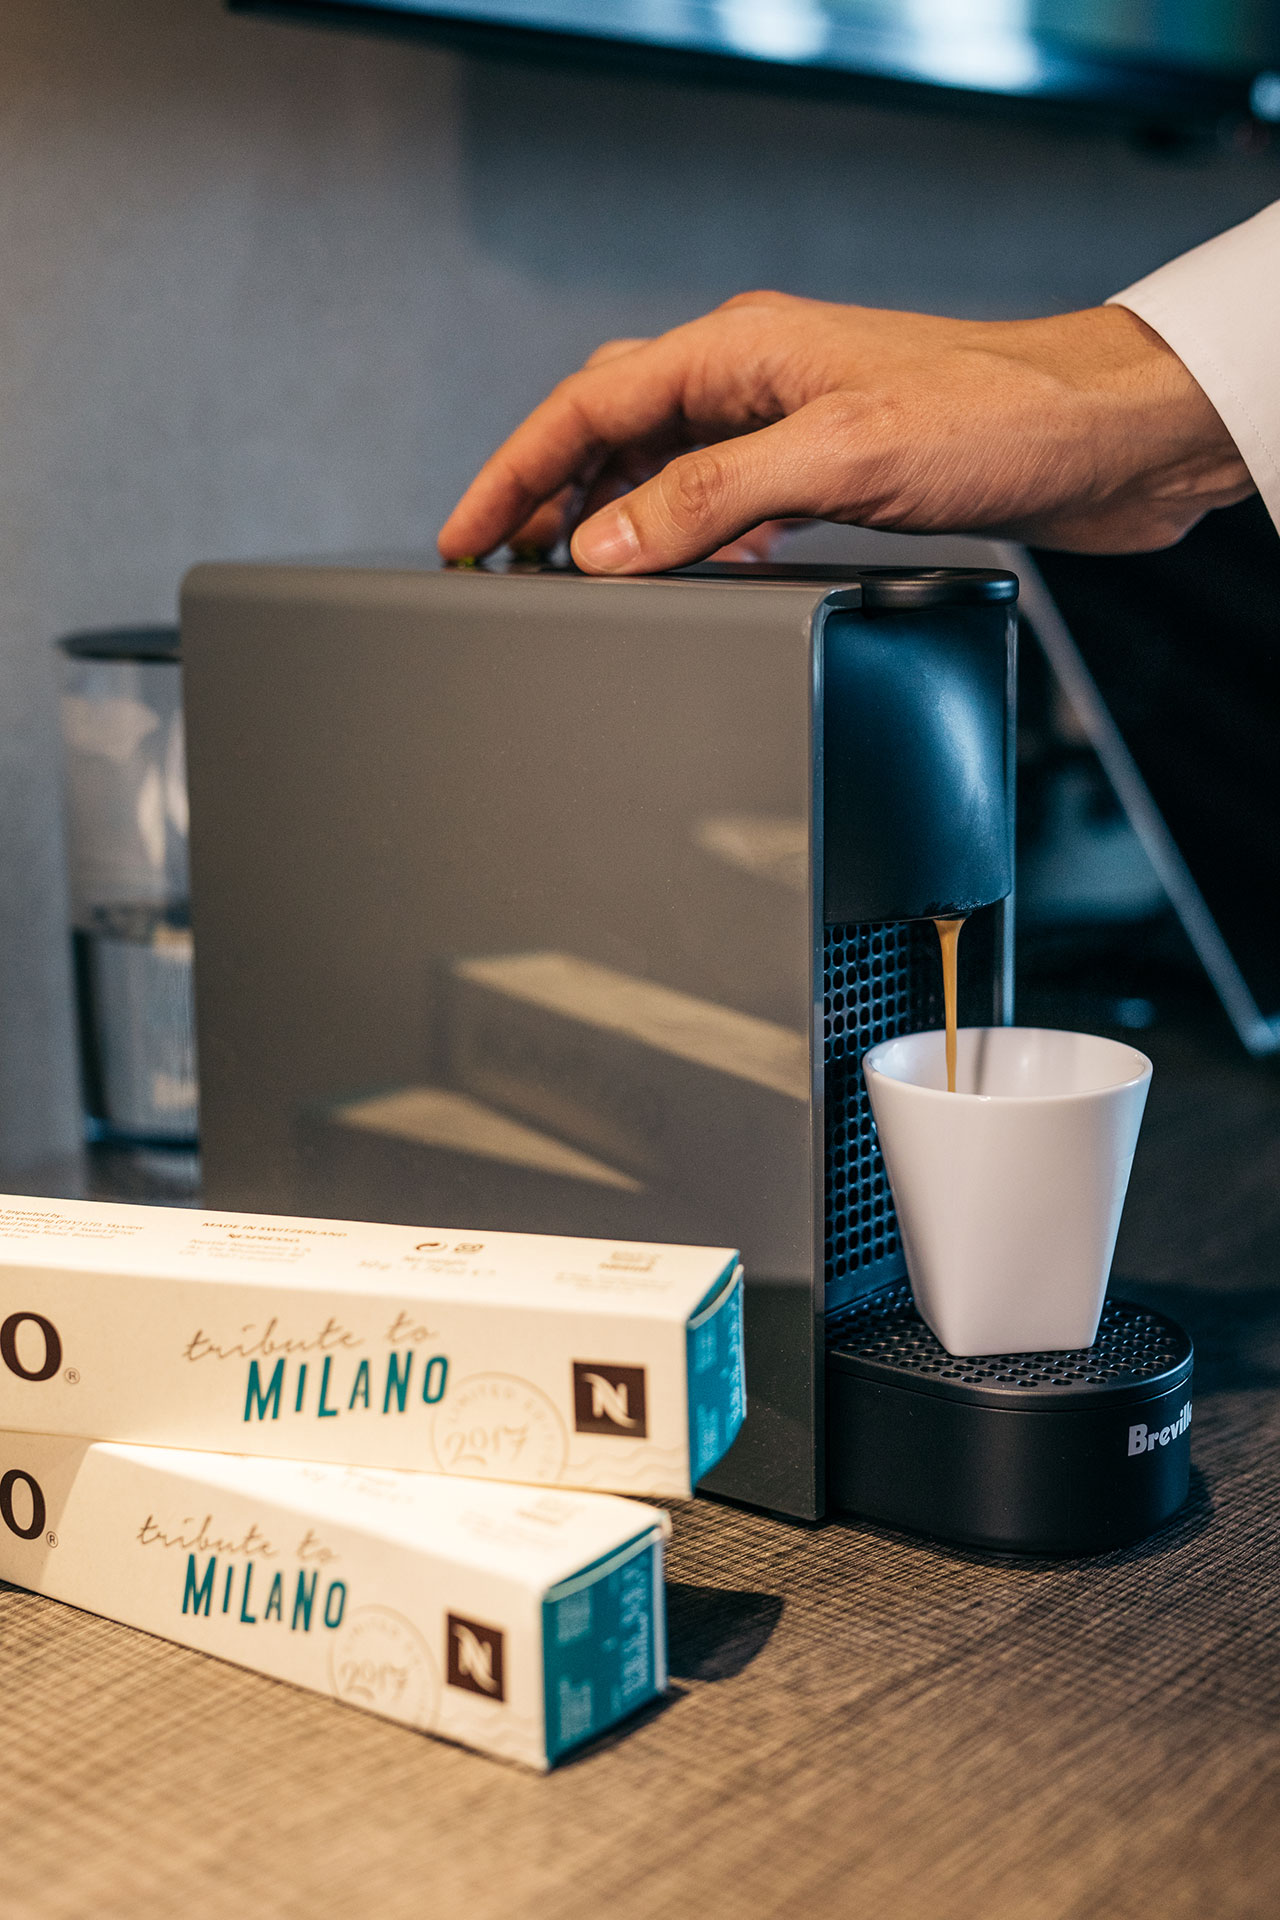 At understrege Sygdom passage An Italian favourite: Nespresso relaunches Tribute to Milano | THE TAILORED  MAN